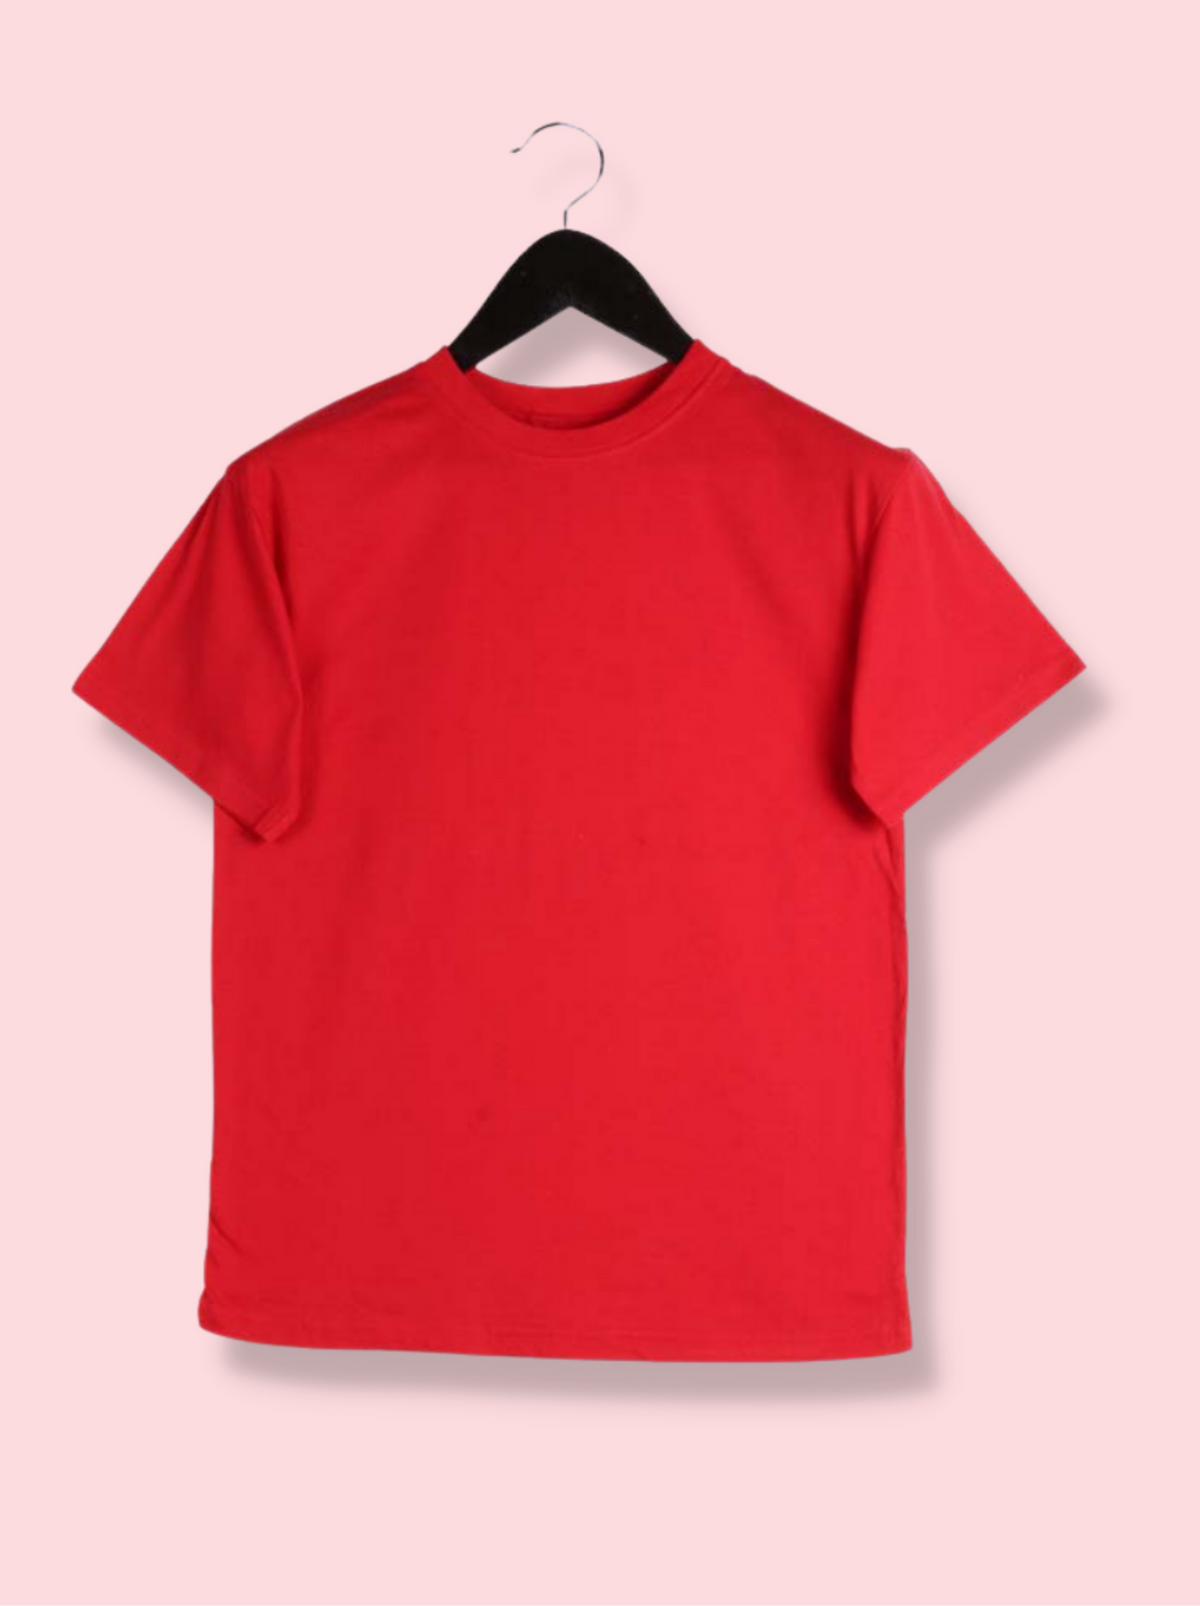 Mens Red Half sleeve Solid Cotton jersey knit T-shirt